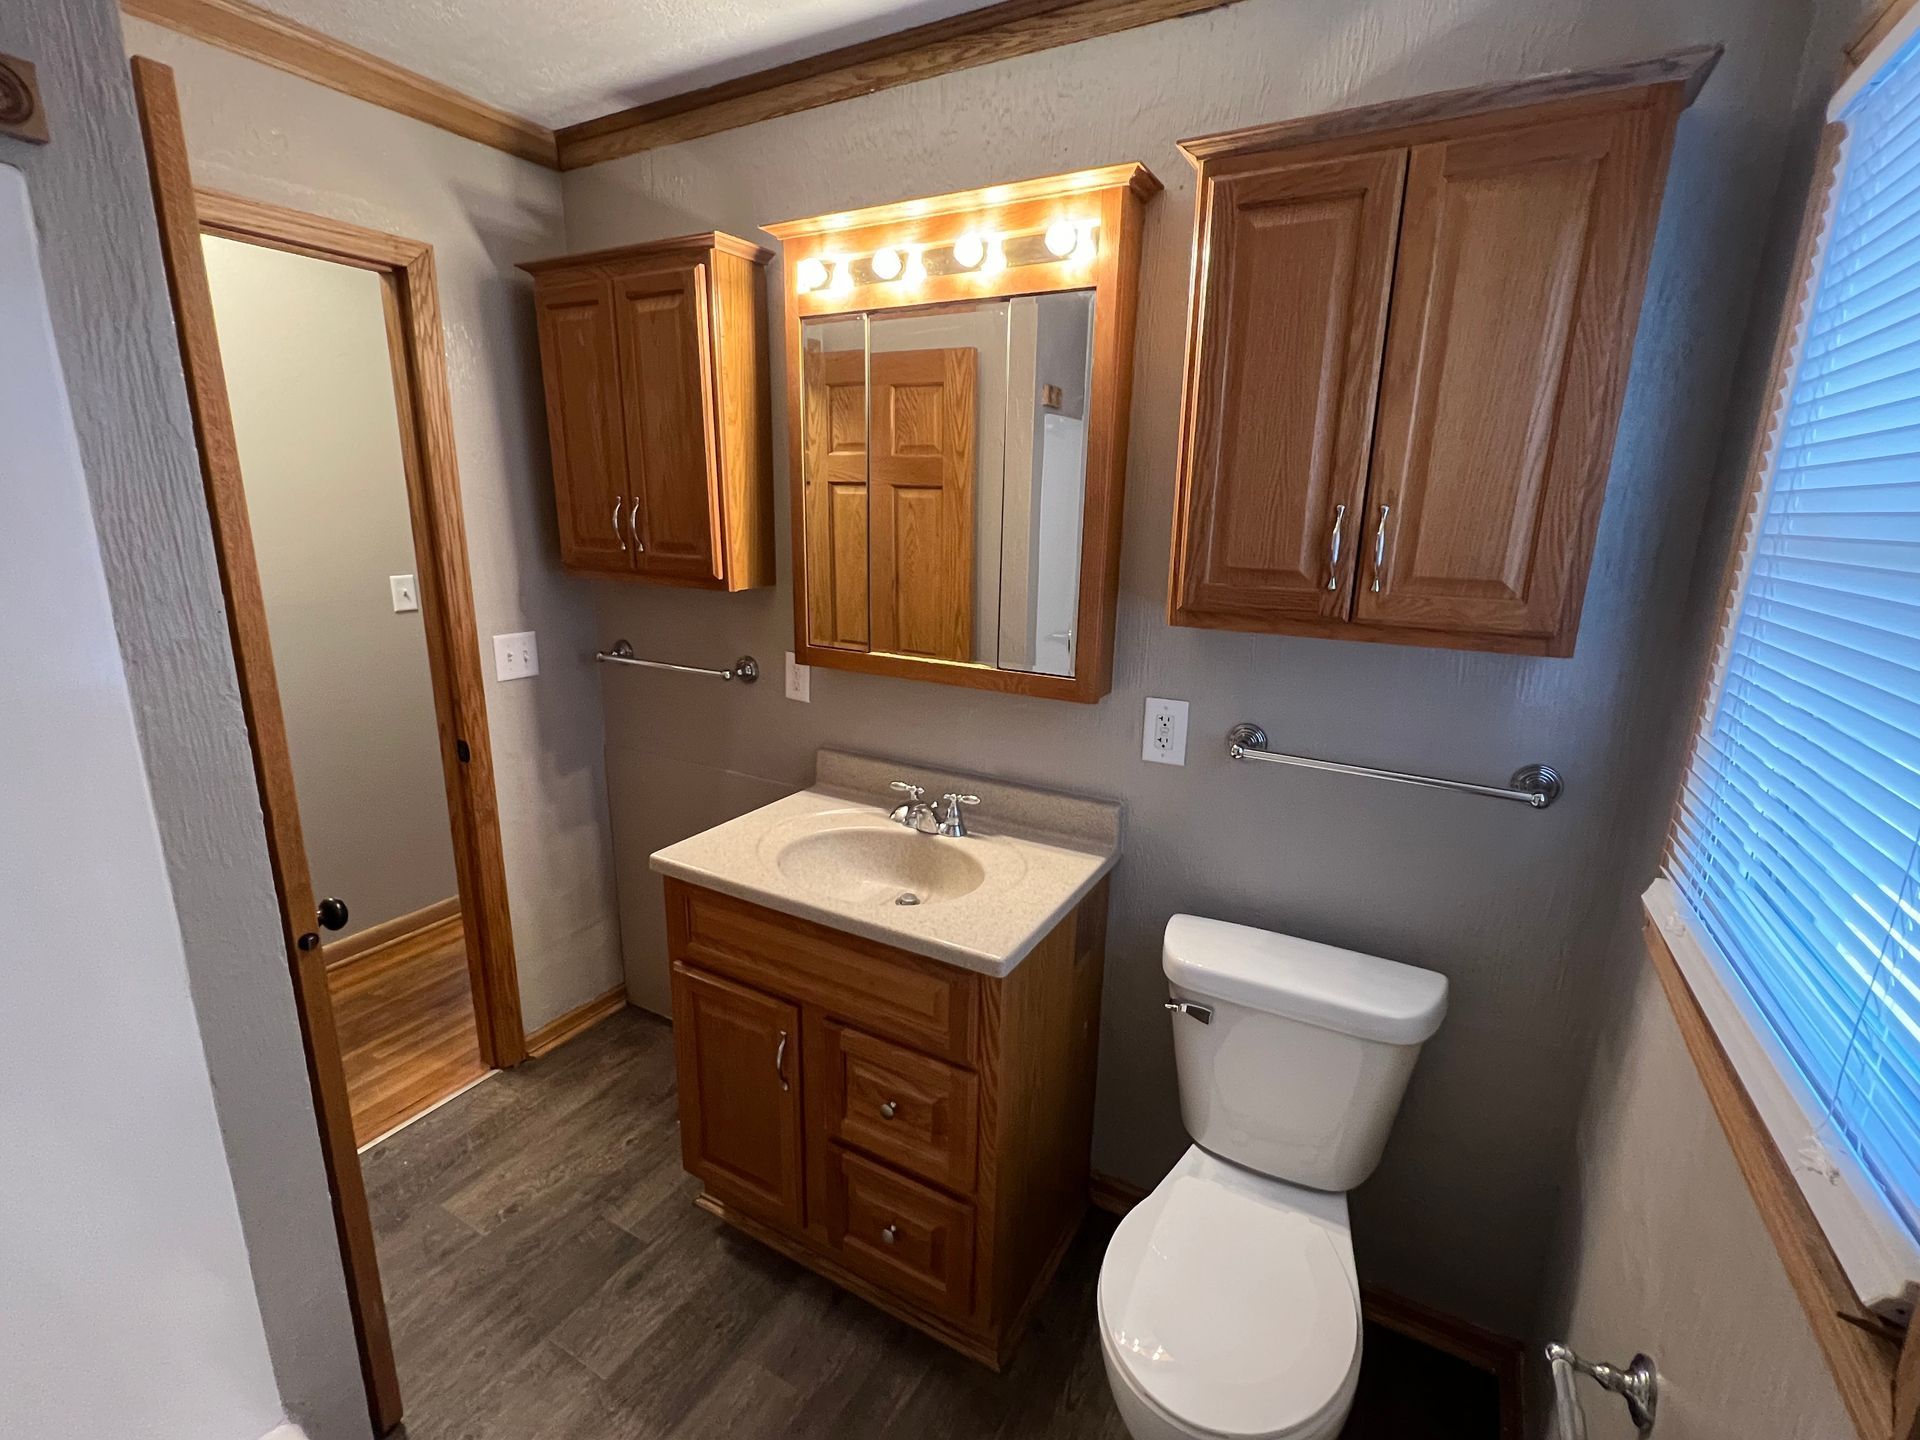 A bathroom with a sink , toilet , mirror and cabinets.